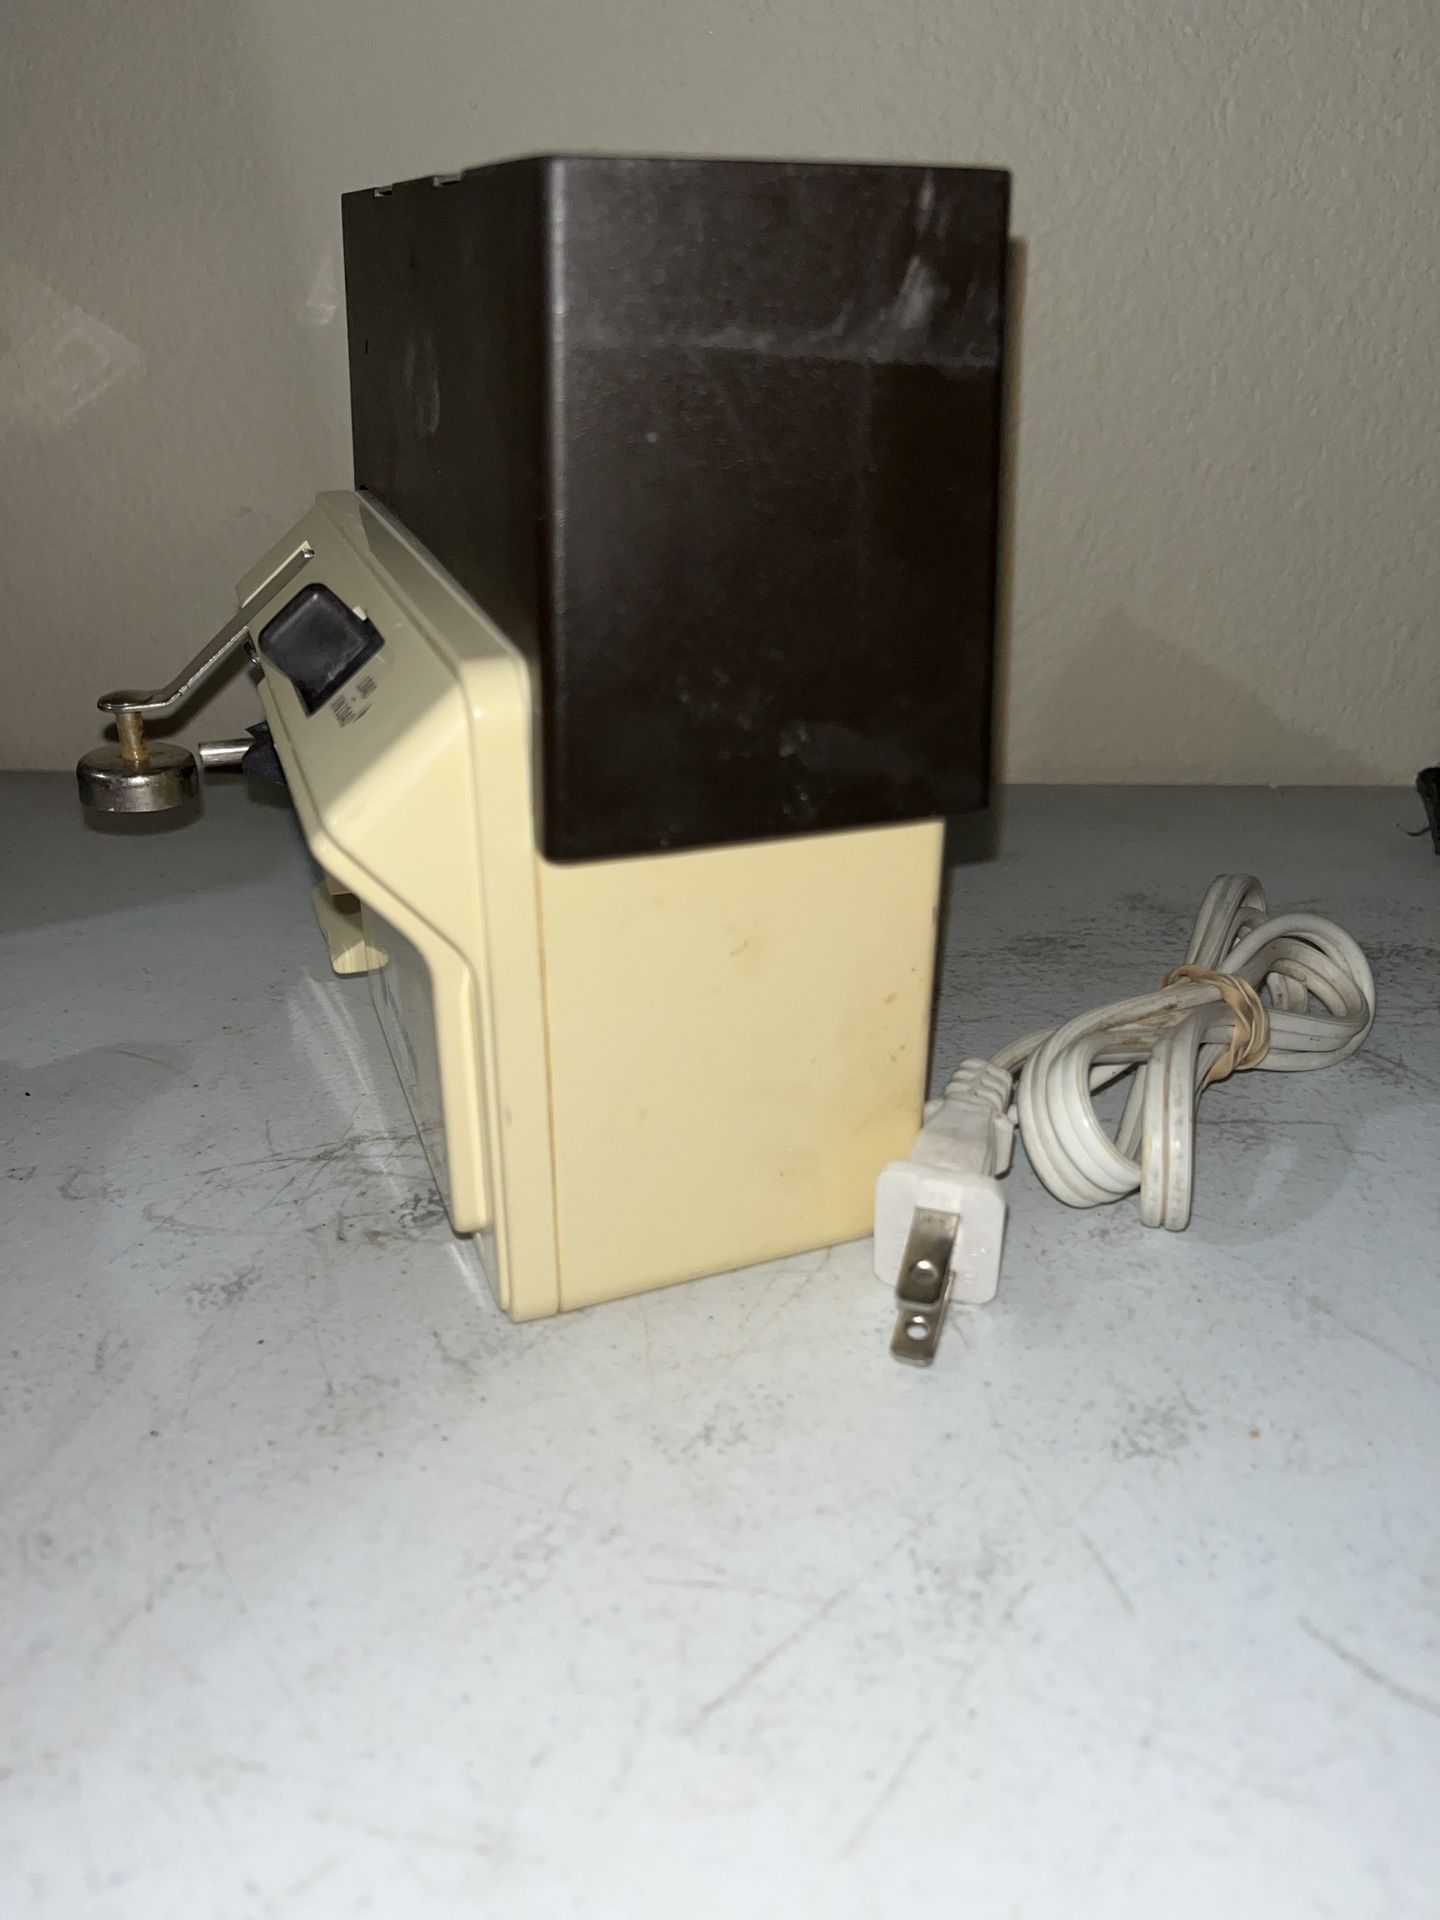 Black & Decker Space Saver Under Cabinet Electric Can Opener (EC59D).  pre-owned.. clean.. works. Interested send number and I will call or text  addre for Sale in Bristol, PA - OfferUp